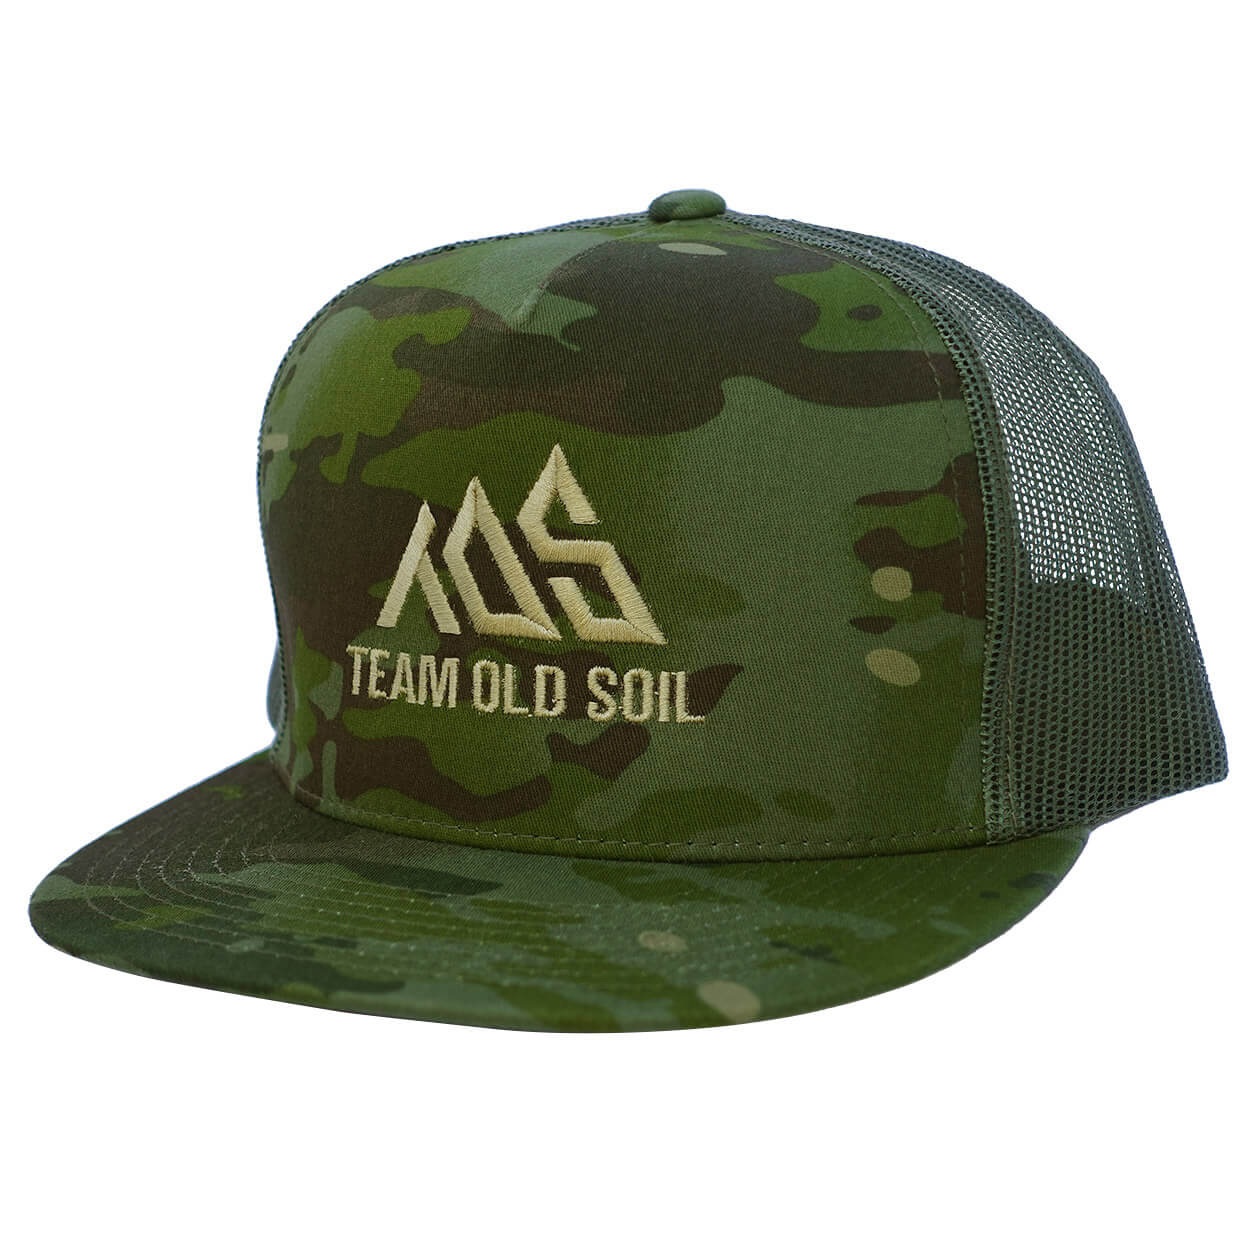 Flat bill snap back embroidered hat camo